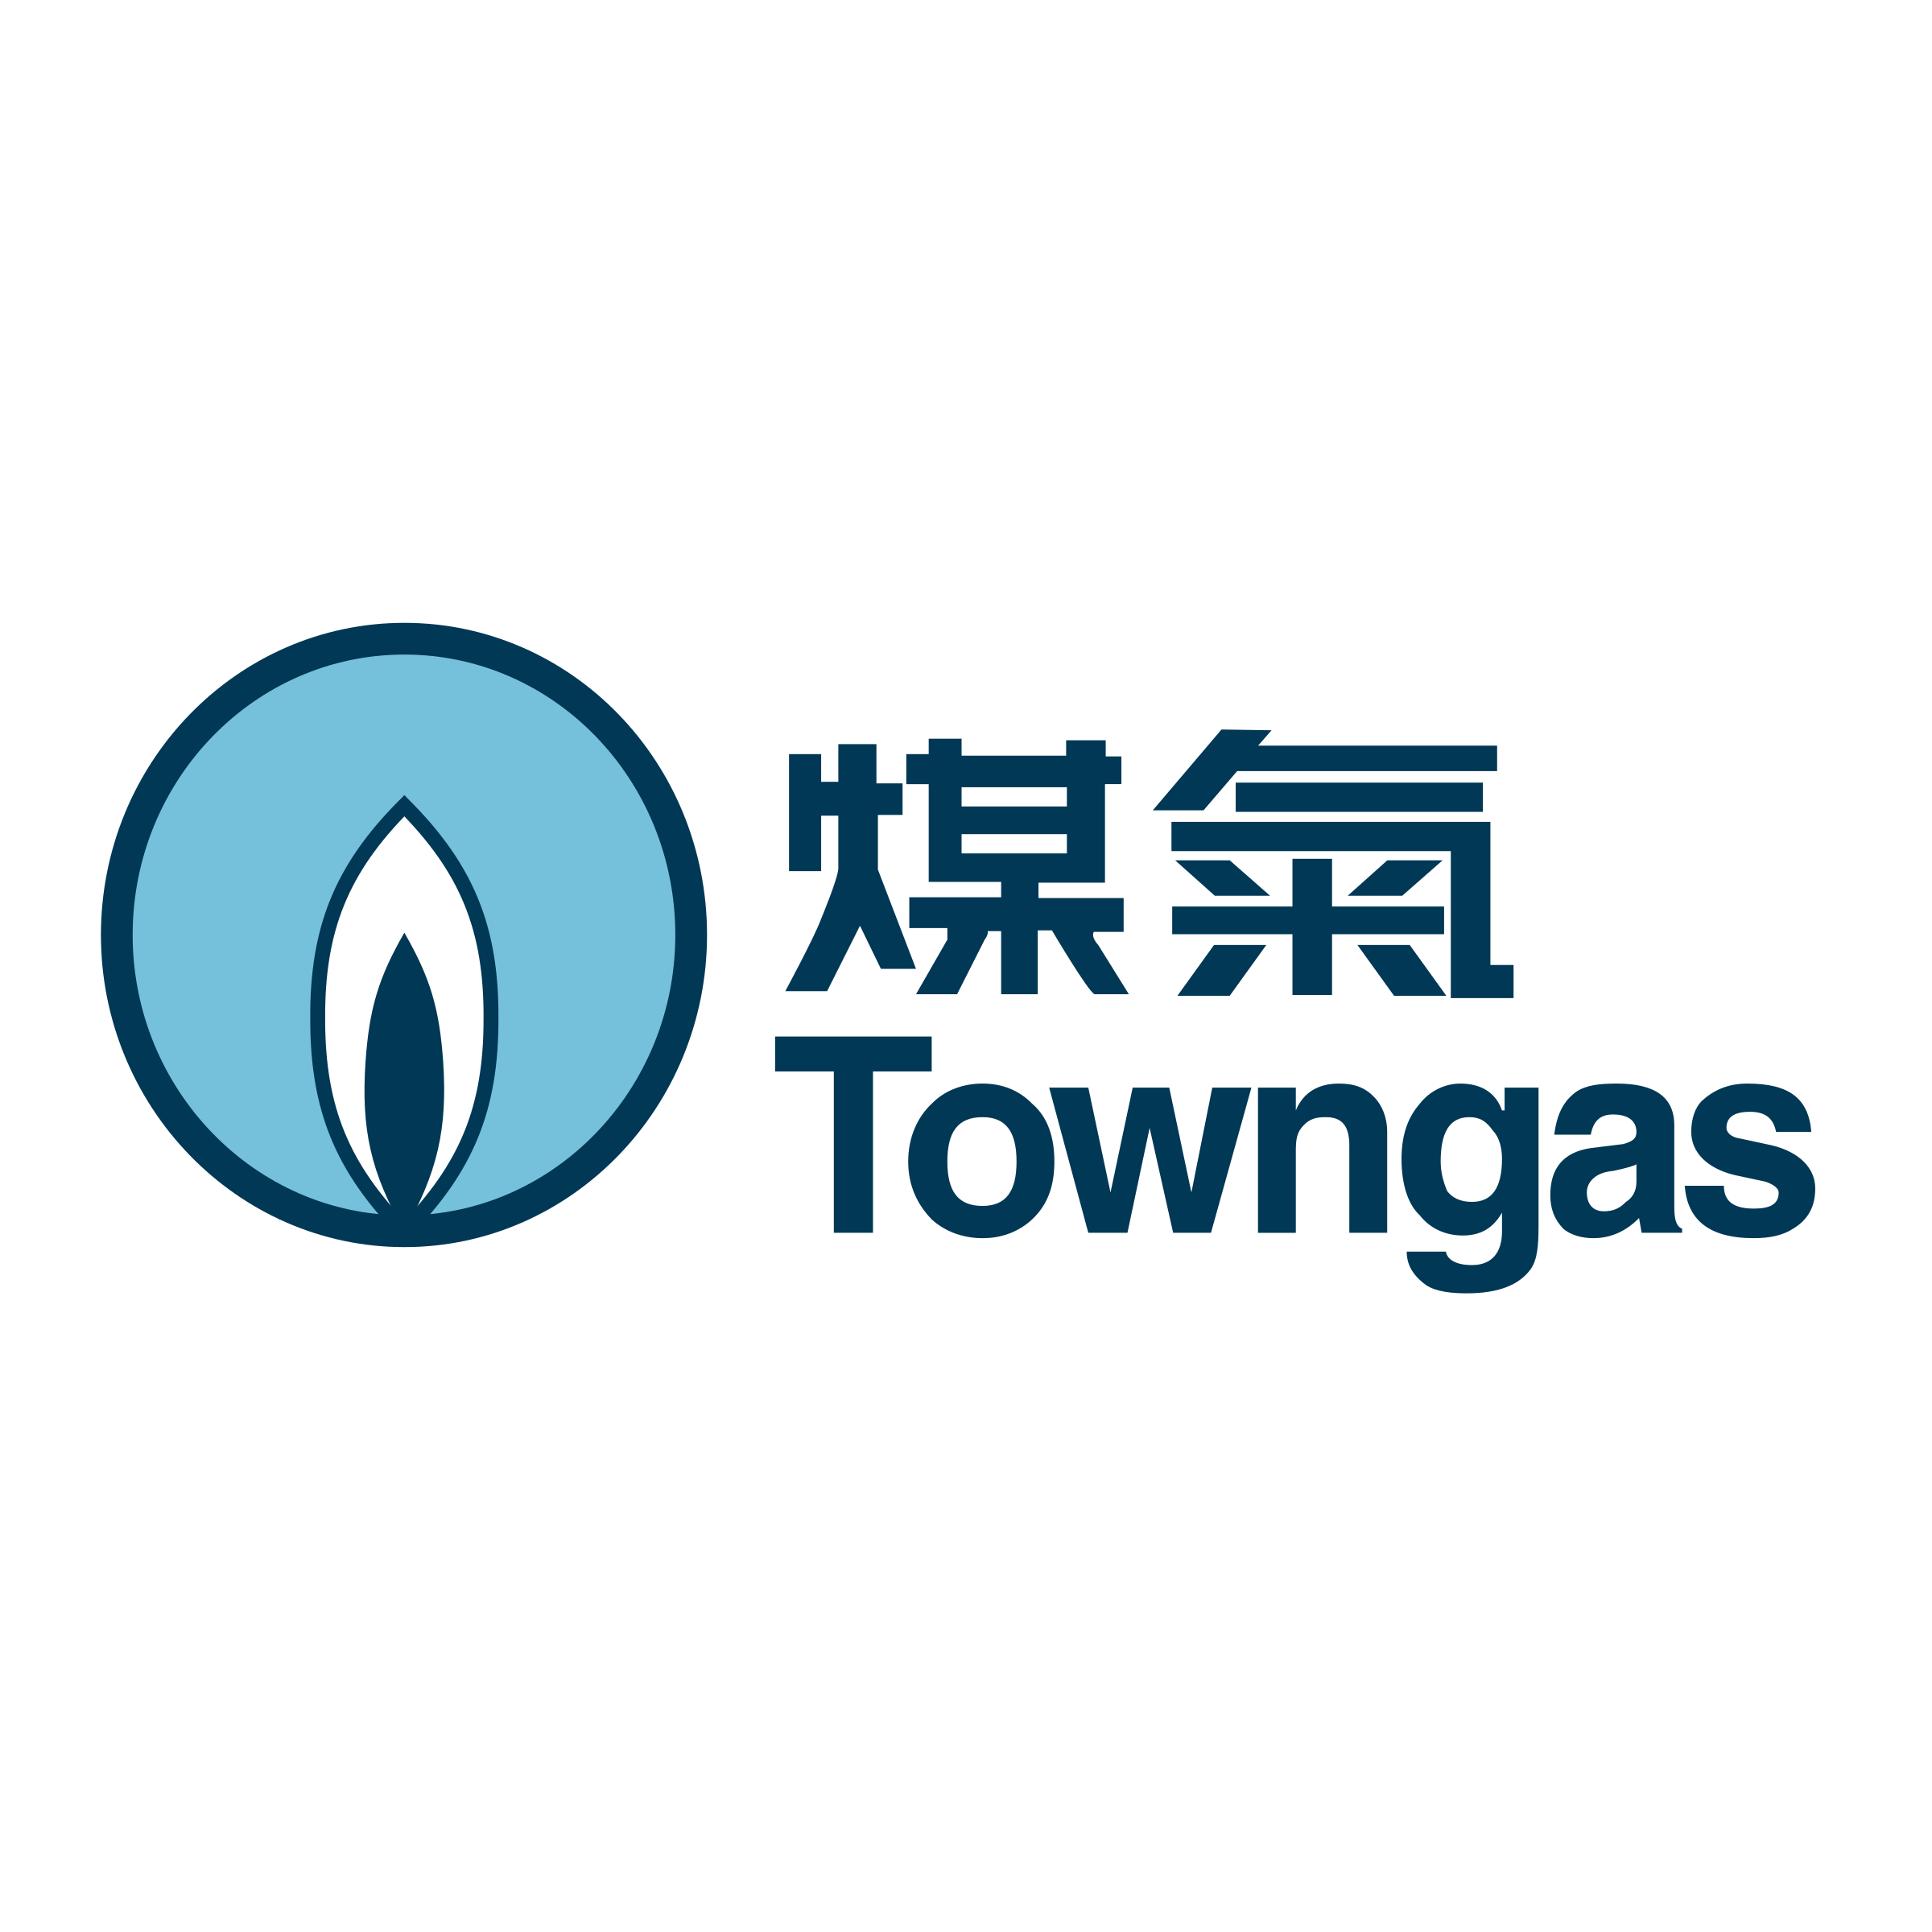 Towngas – Digital Customer Engagement Project